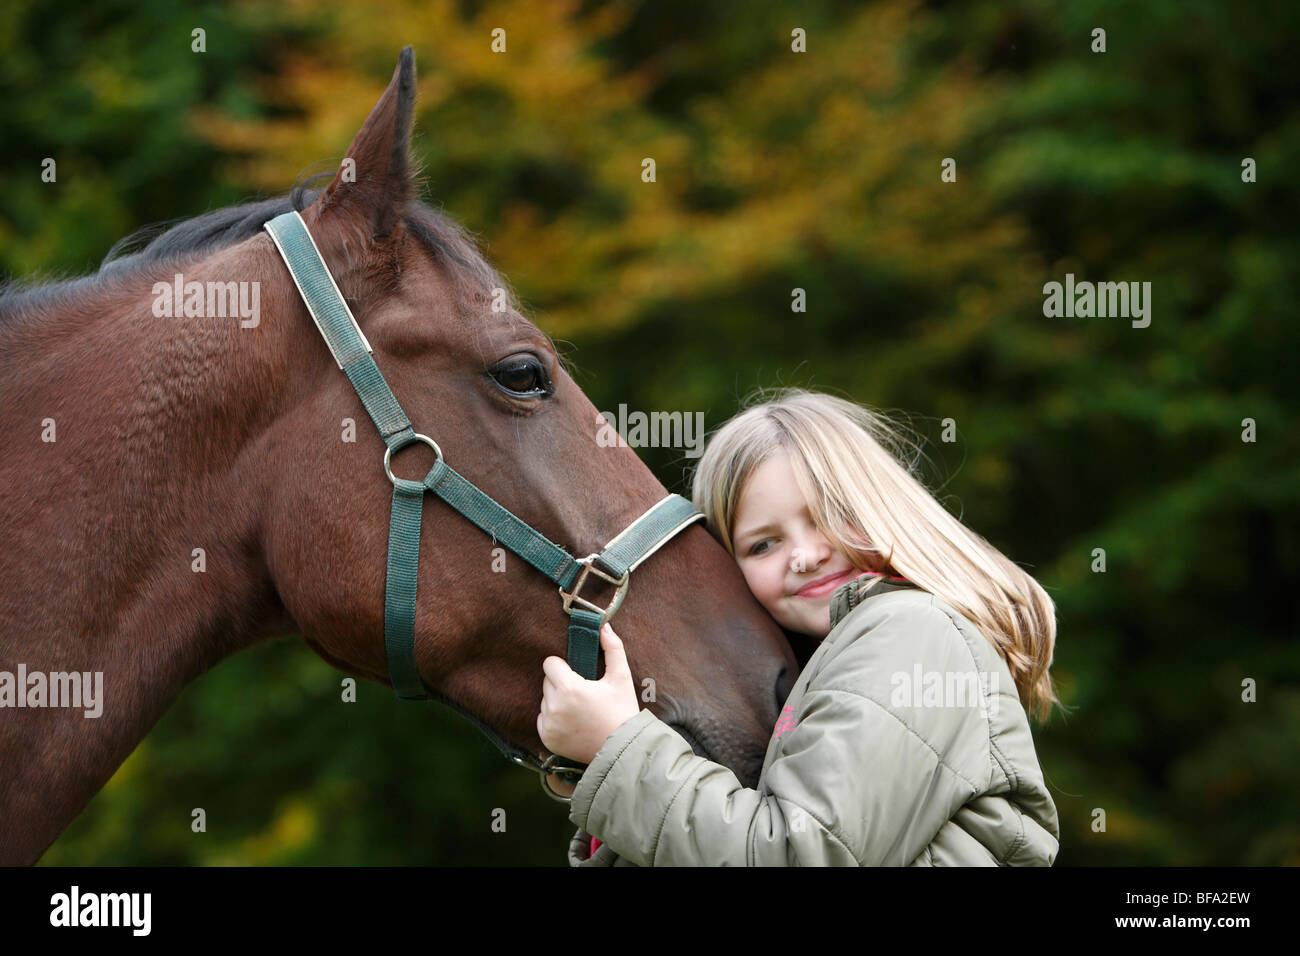 domestic horse (Equus przewalskii f. caballus), girl caressfully embracing the head of a horse, Germany Stock Photo